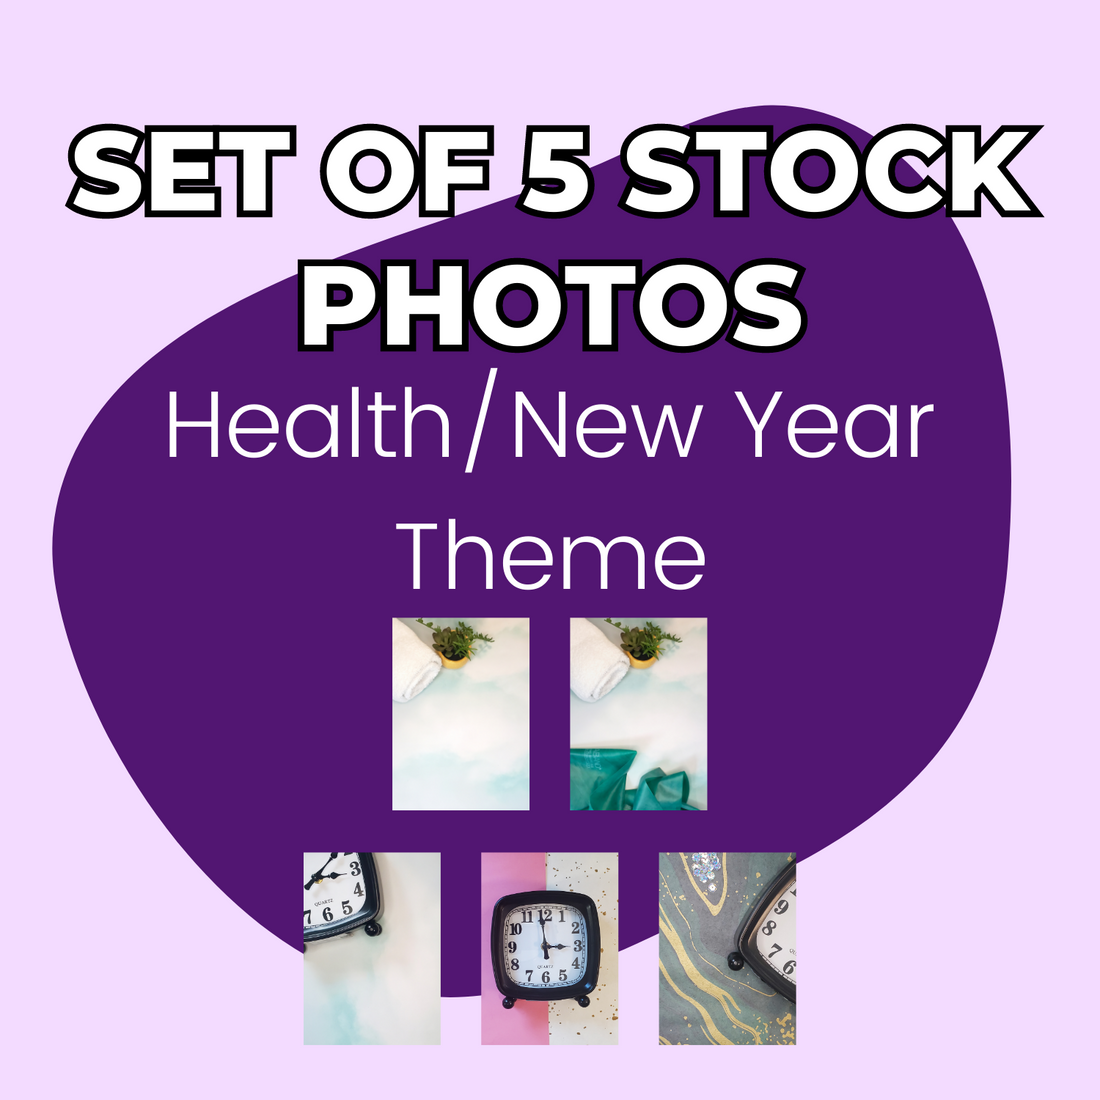 Set of 5 Health and New Year Theme Stock Photos by Blogger Breakthrough Summit.